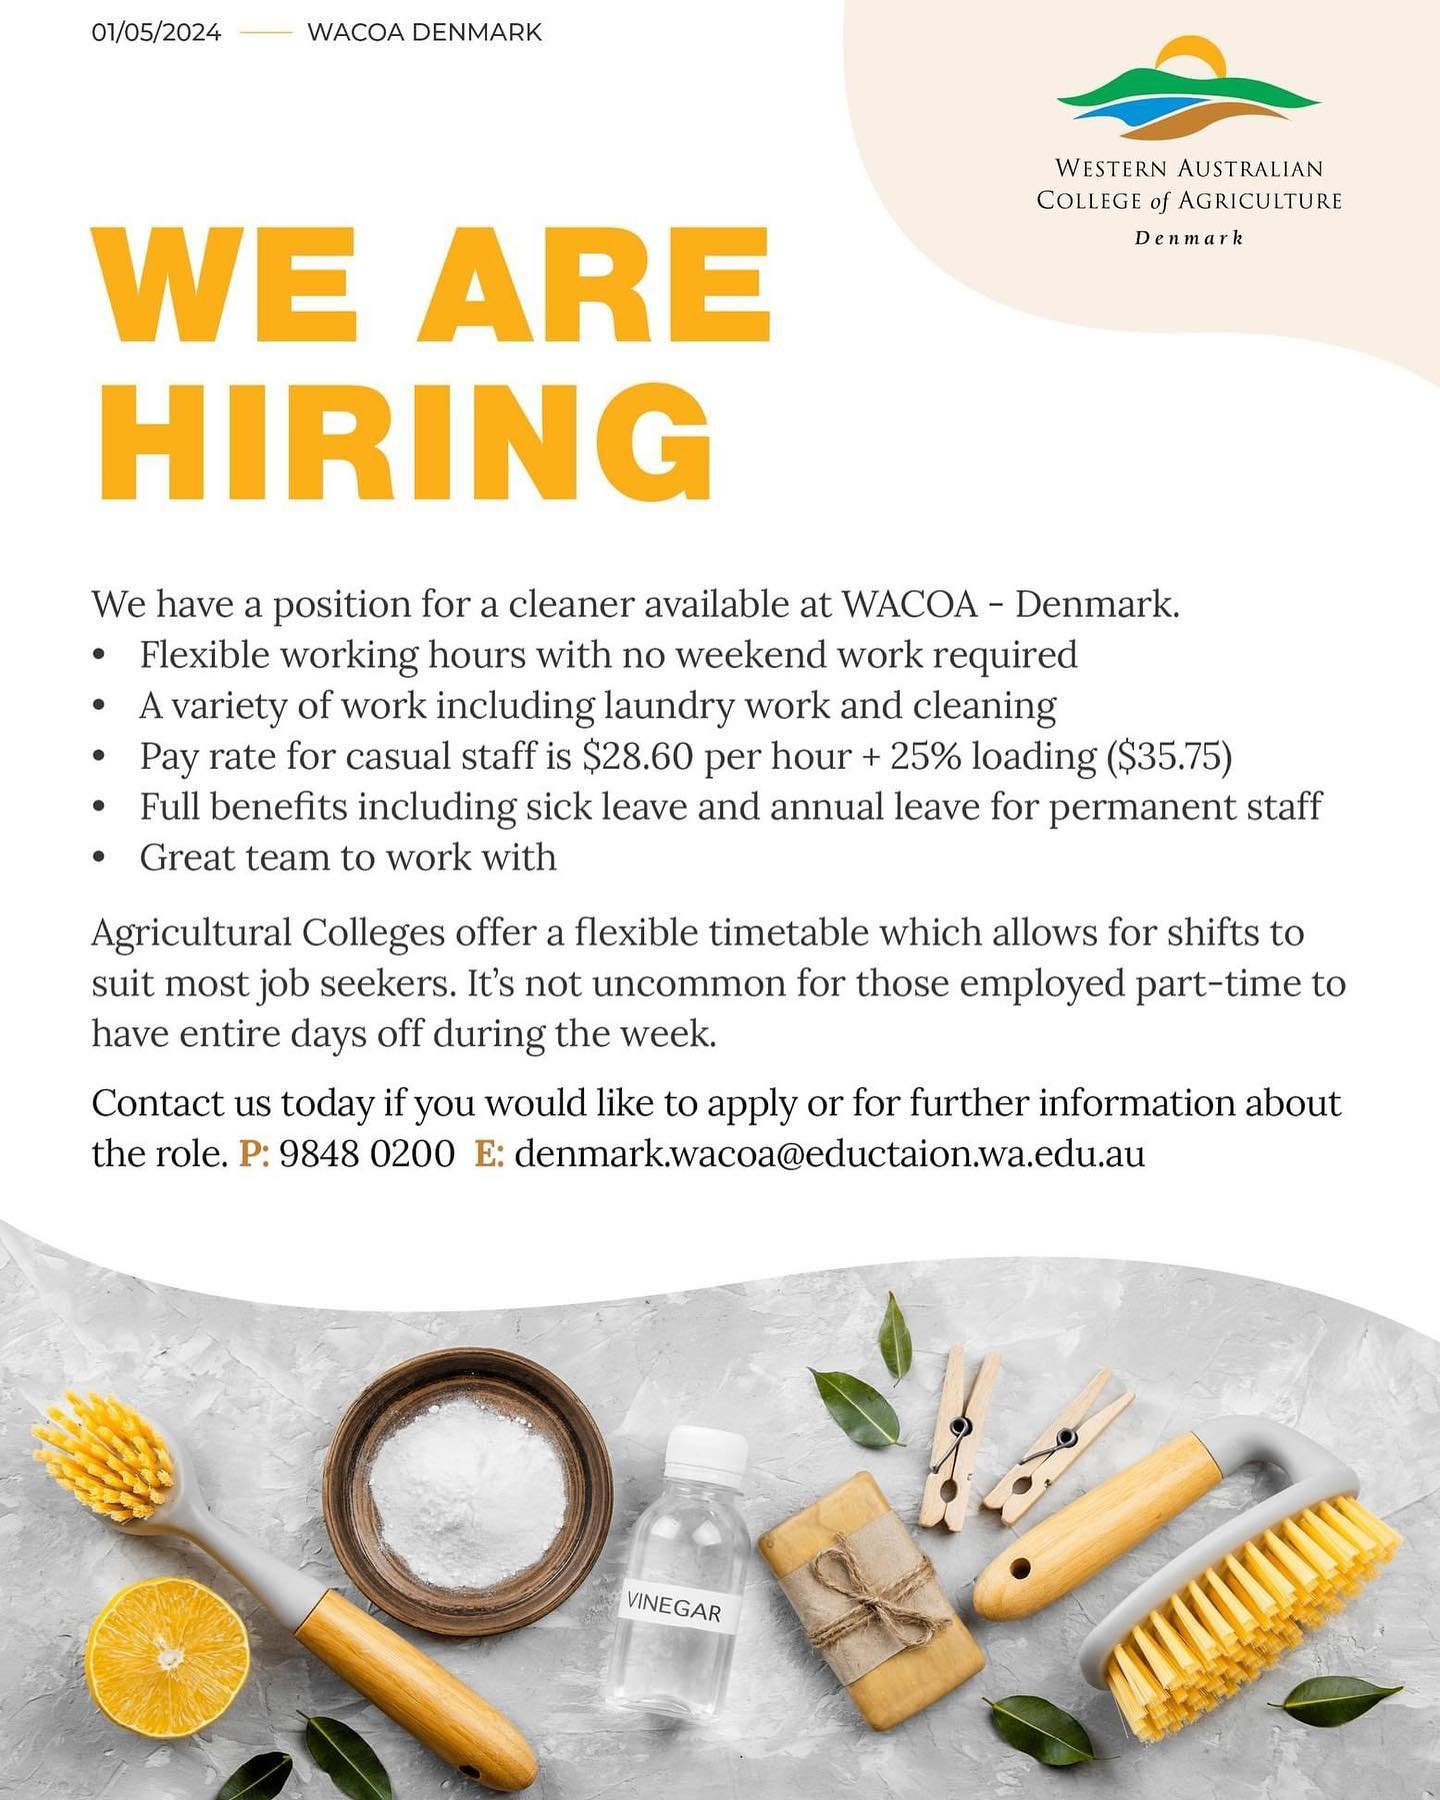 WE ARE HIRING!

We have a vacancy in our cleaning department. We are flexible with working hours and can work around your availability. 
Pay rate for casual staff is $28.60 per hour + 25% loading ($35.75). 
Permanent staff receive full benefits inclu